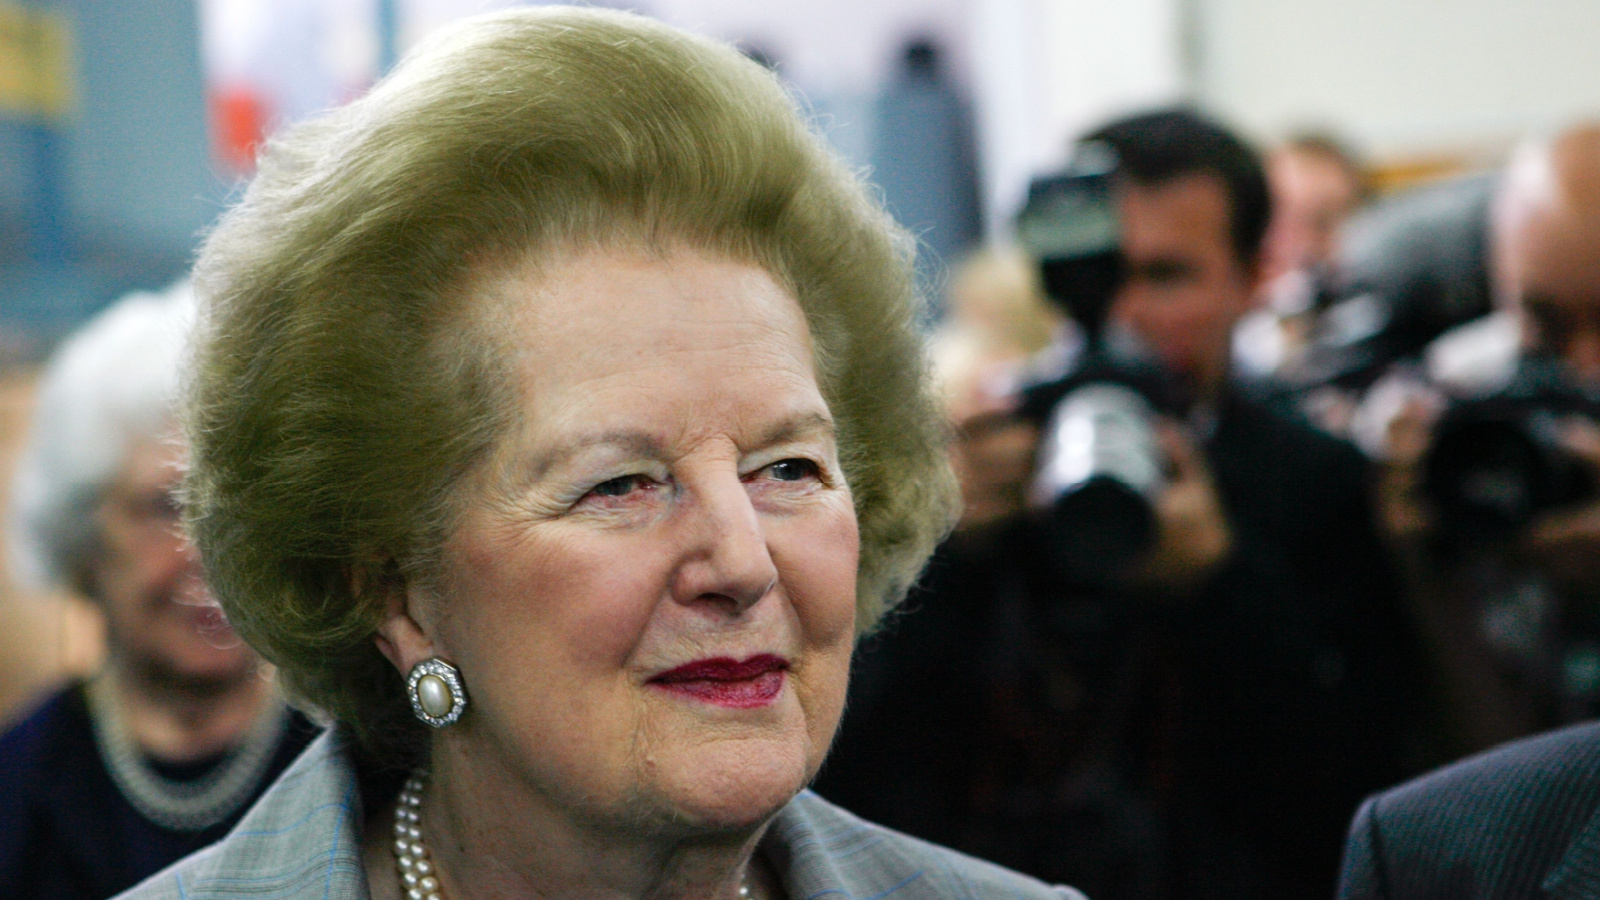 image credit: Alessia-Pierdomenico/Shutterstock <p><span>The U.K.’s first female Prime Minister, Margaret Thatcher, was known for her strong-willed and uncompromising leadership style. Her economic policies transformed the British economy, although not without controversy. Thatcher’s impact on British politics is undeniable, earning her the nickname “The Iron Lady.” Her legacy continues to provoke debate and admiration.</span></p>